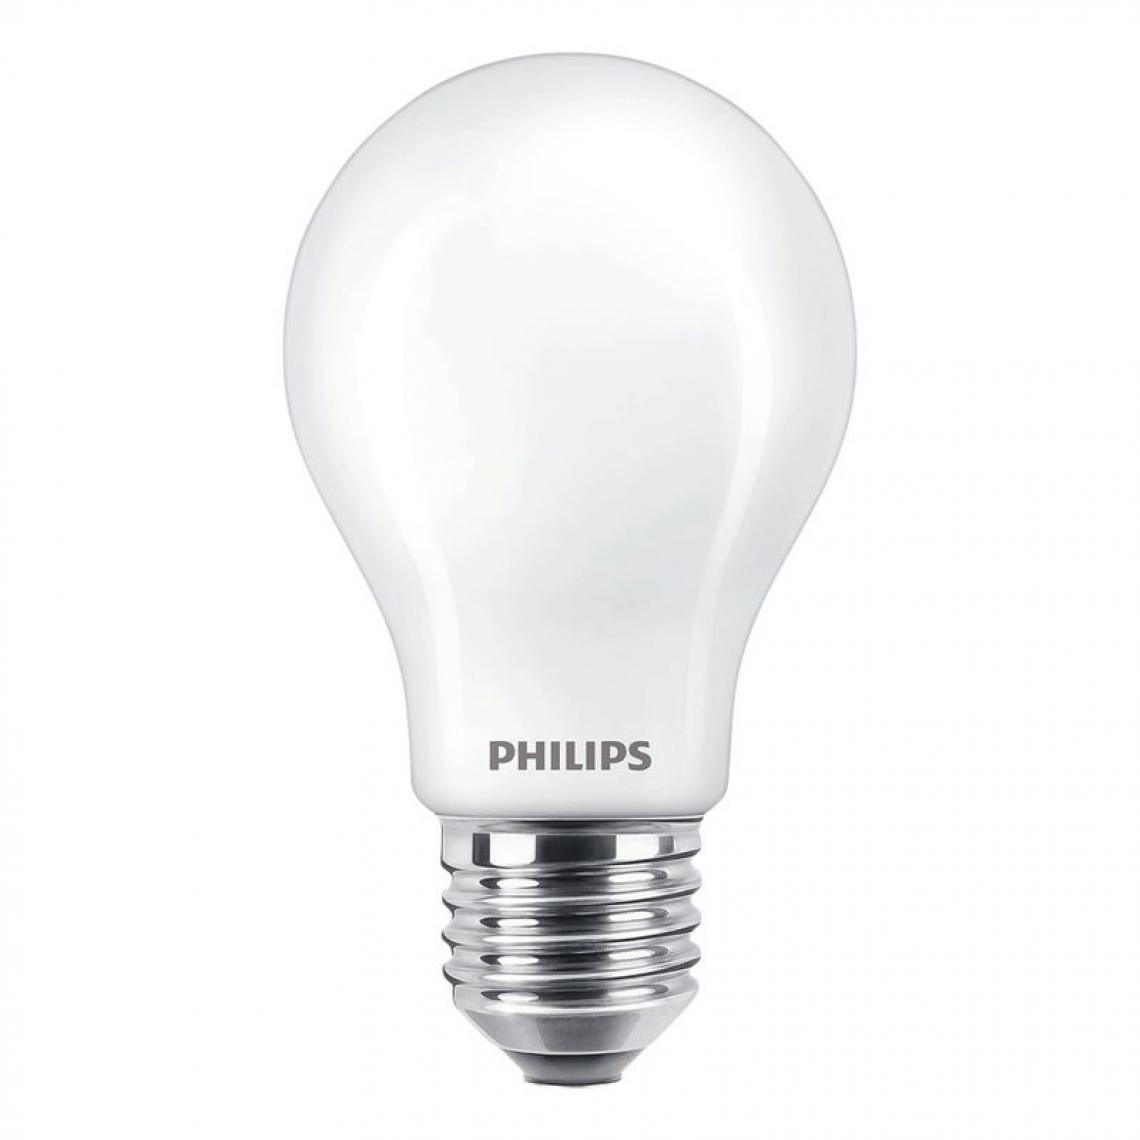 Philips - Ampoule LED dimmable E27 STD PHILIPS Blanc chaud 100w - Ampoules LED